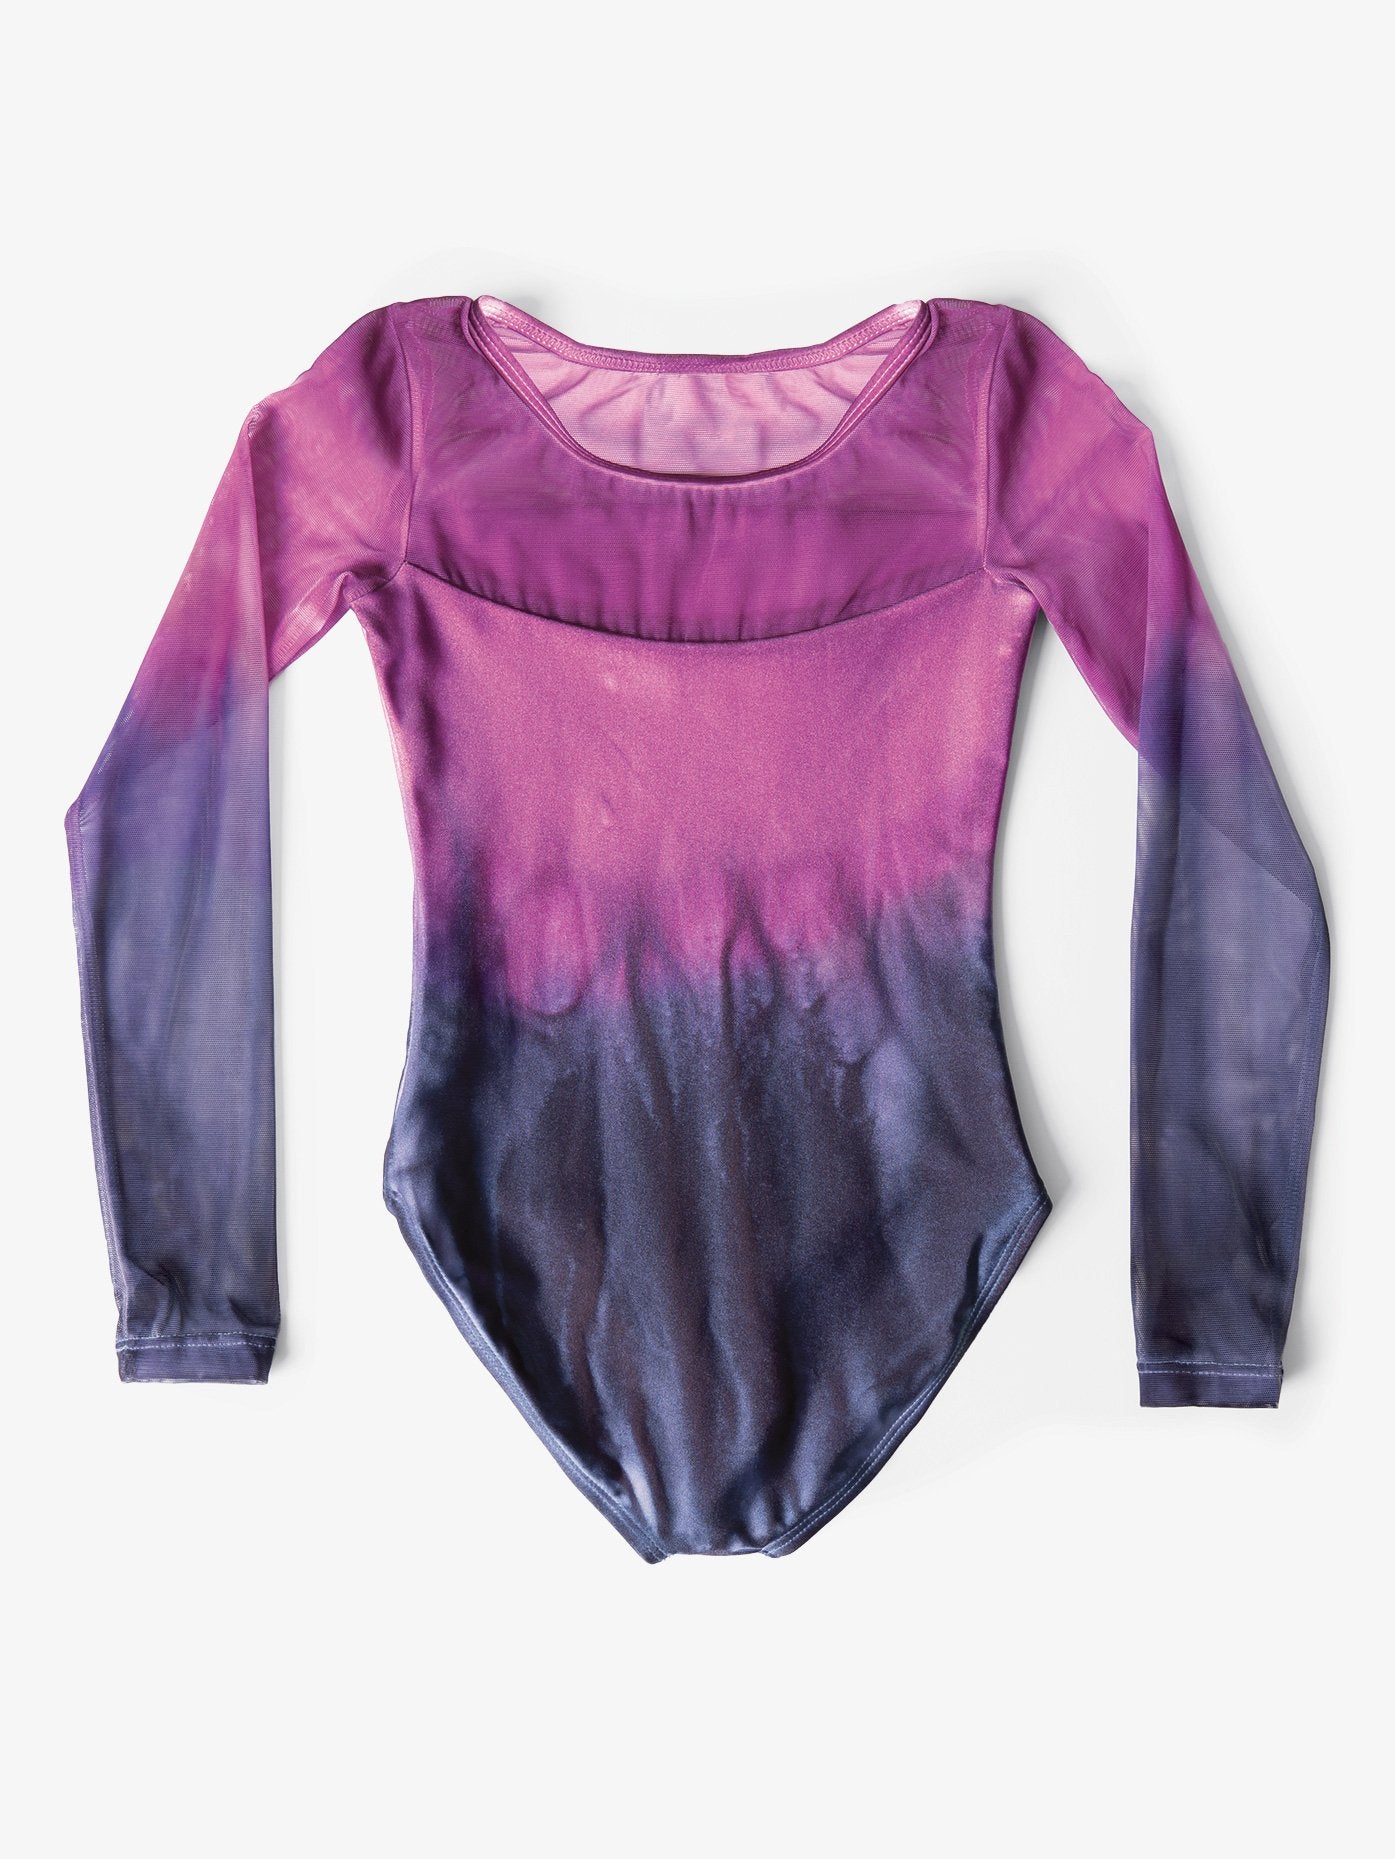 Hand-painted pink and black women's long sleeve leotard